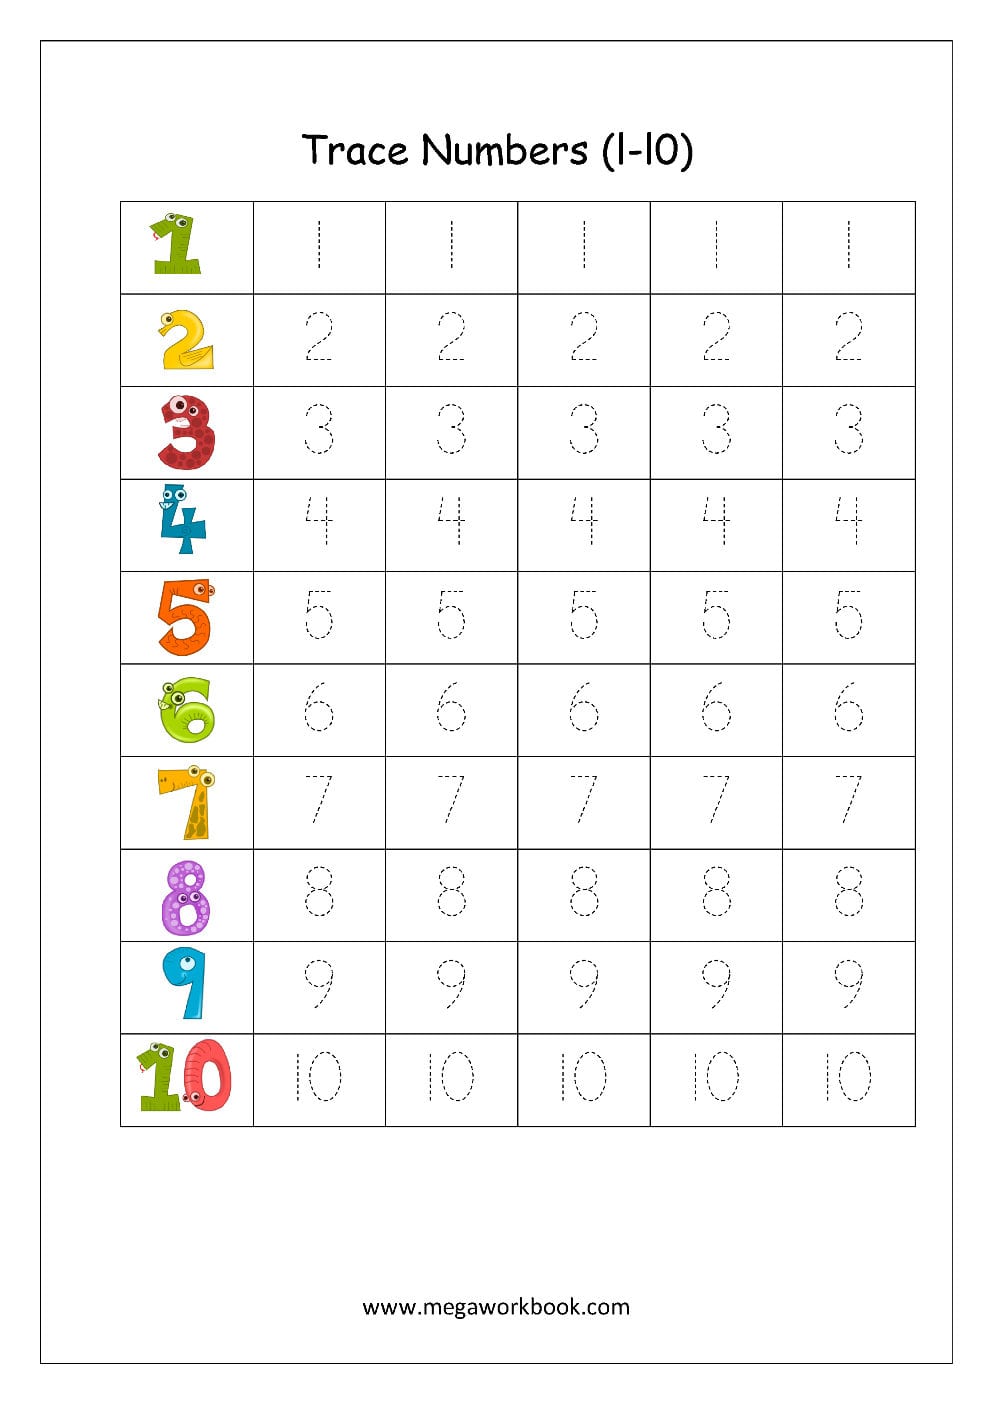 Free Printable Number Tracing And Writing 110 Worksheets Regarding Number Tracing Worksheets 1 10